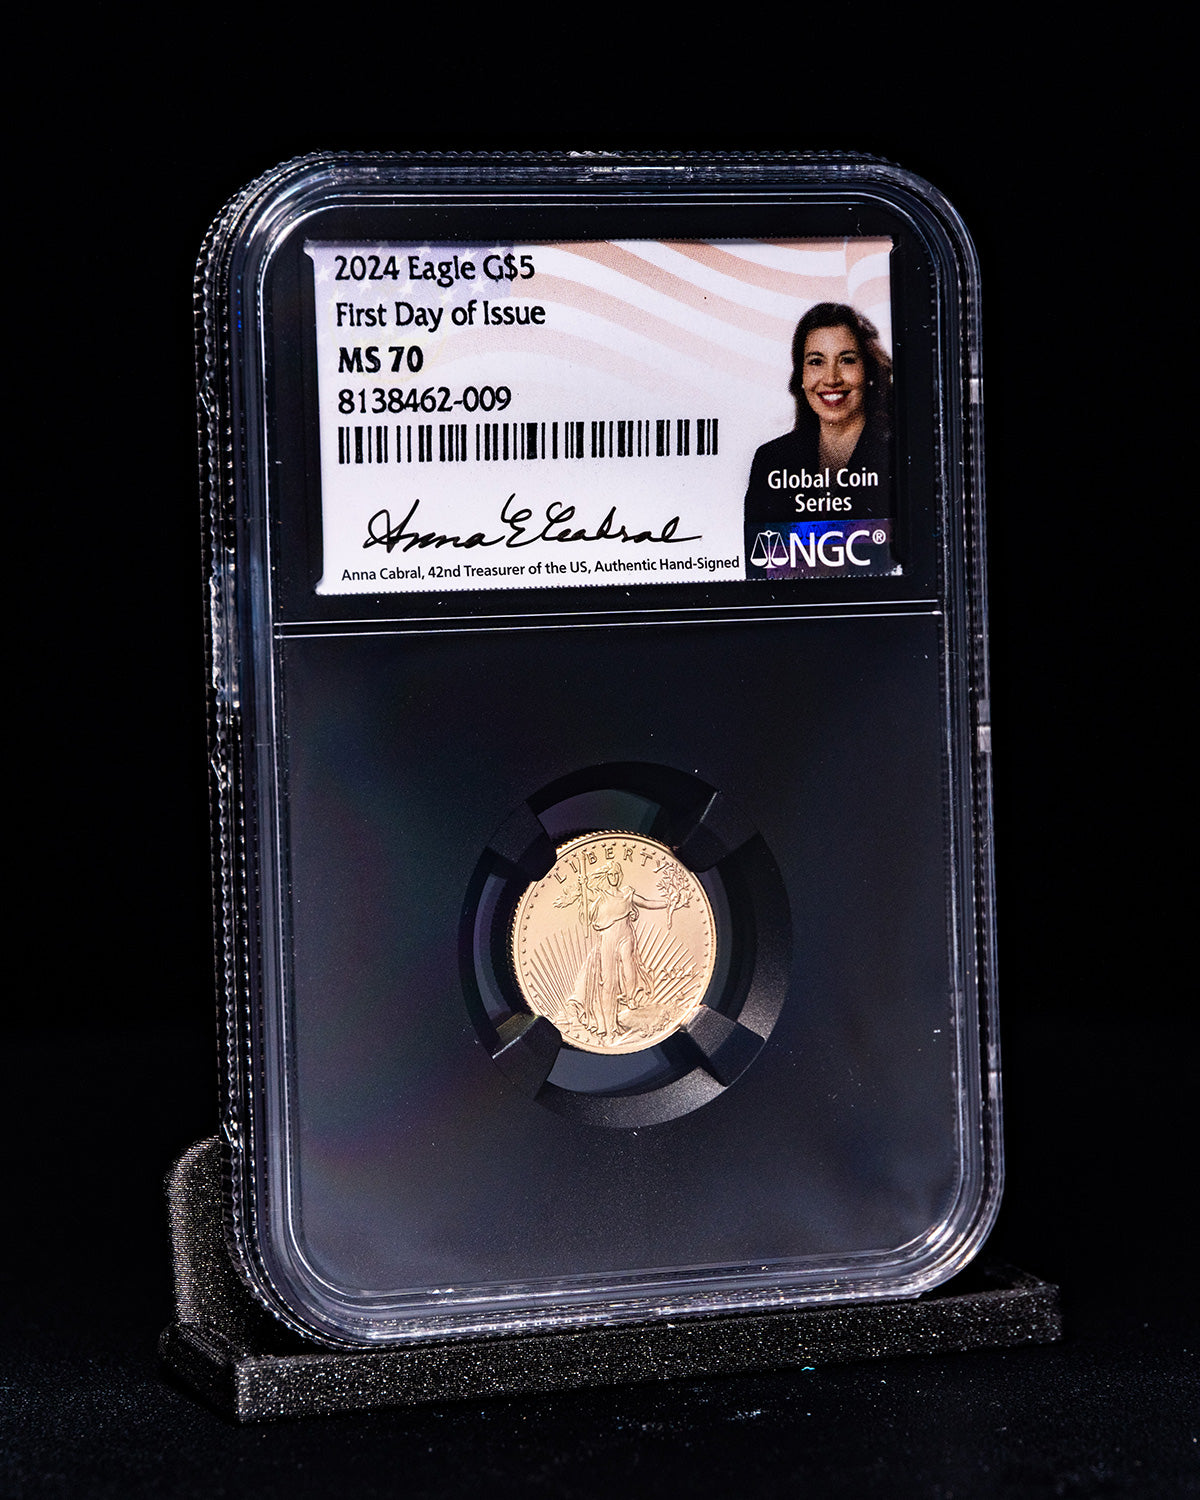 2024 $5 Gold Eagle | First Day of Issue Global Coin Series NGC MS70 | Anna Cabral Autographed